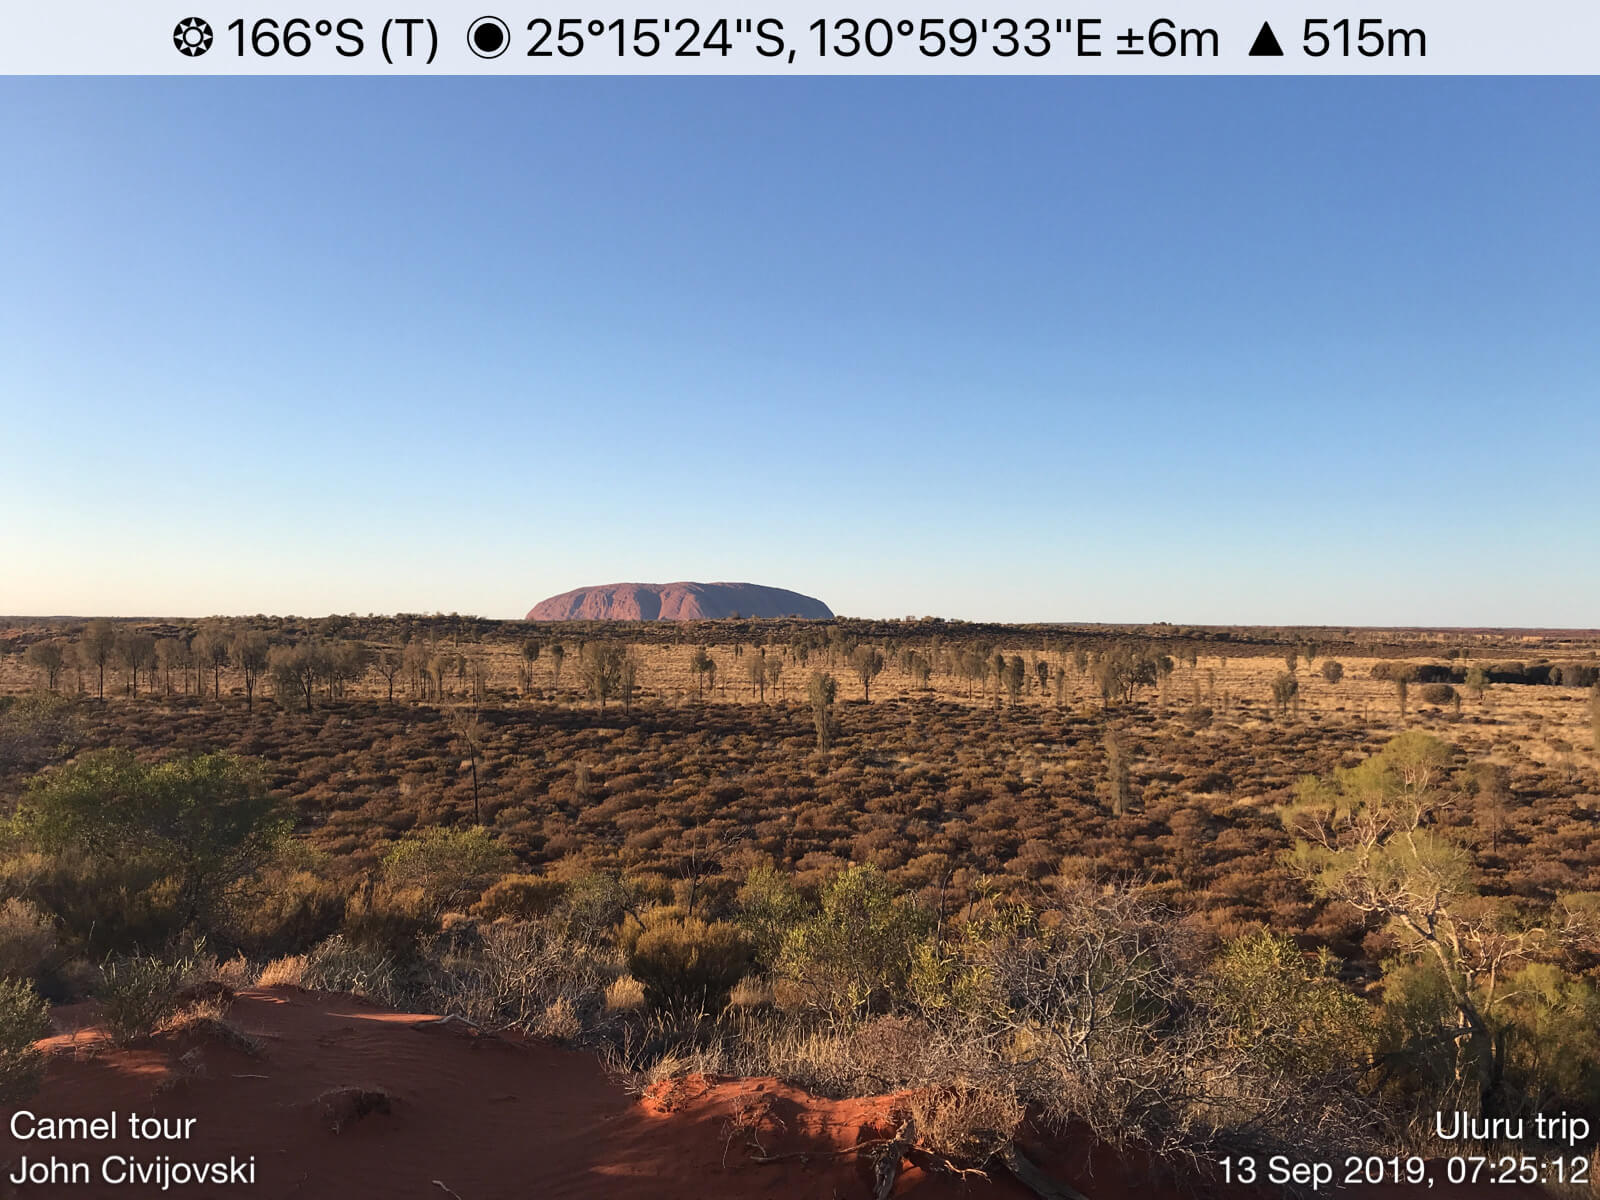 Ayers Rock in the distance.